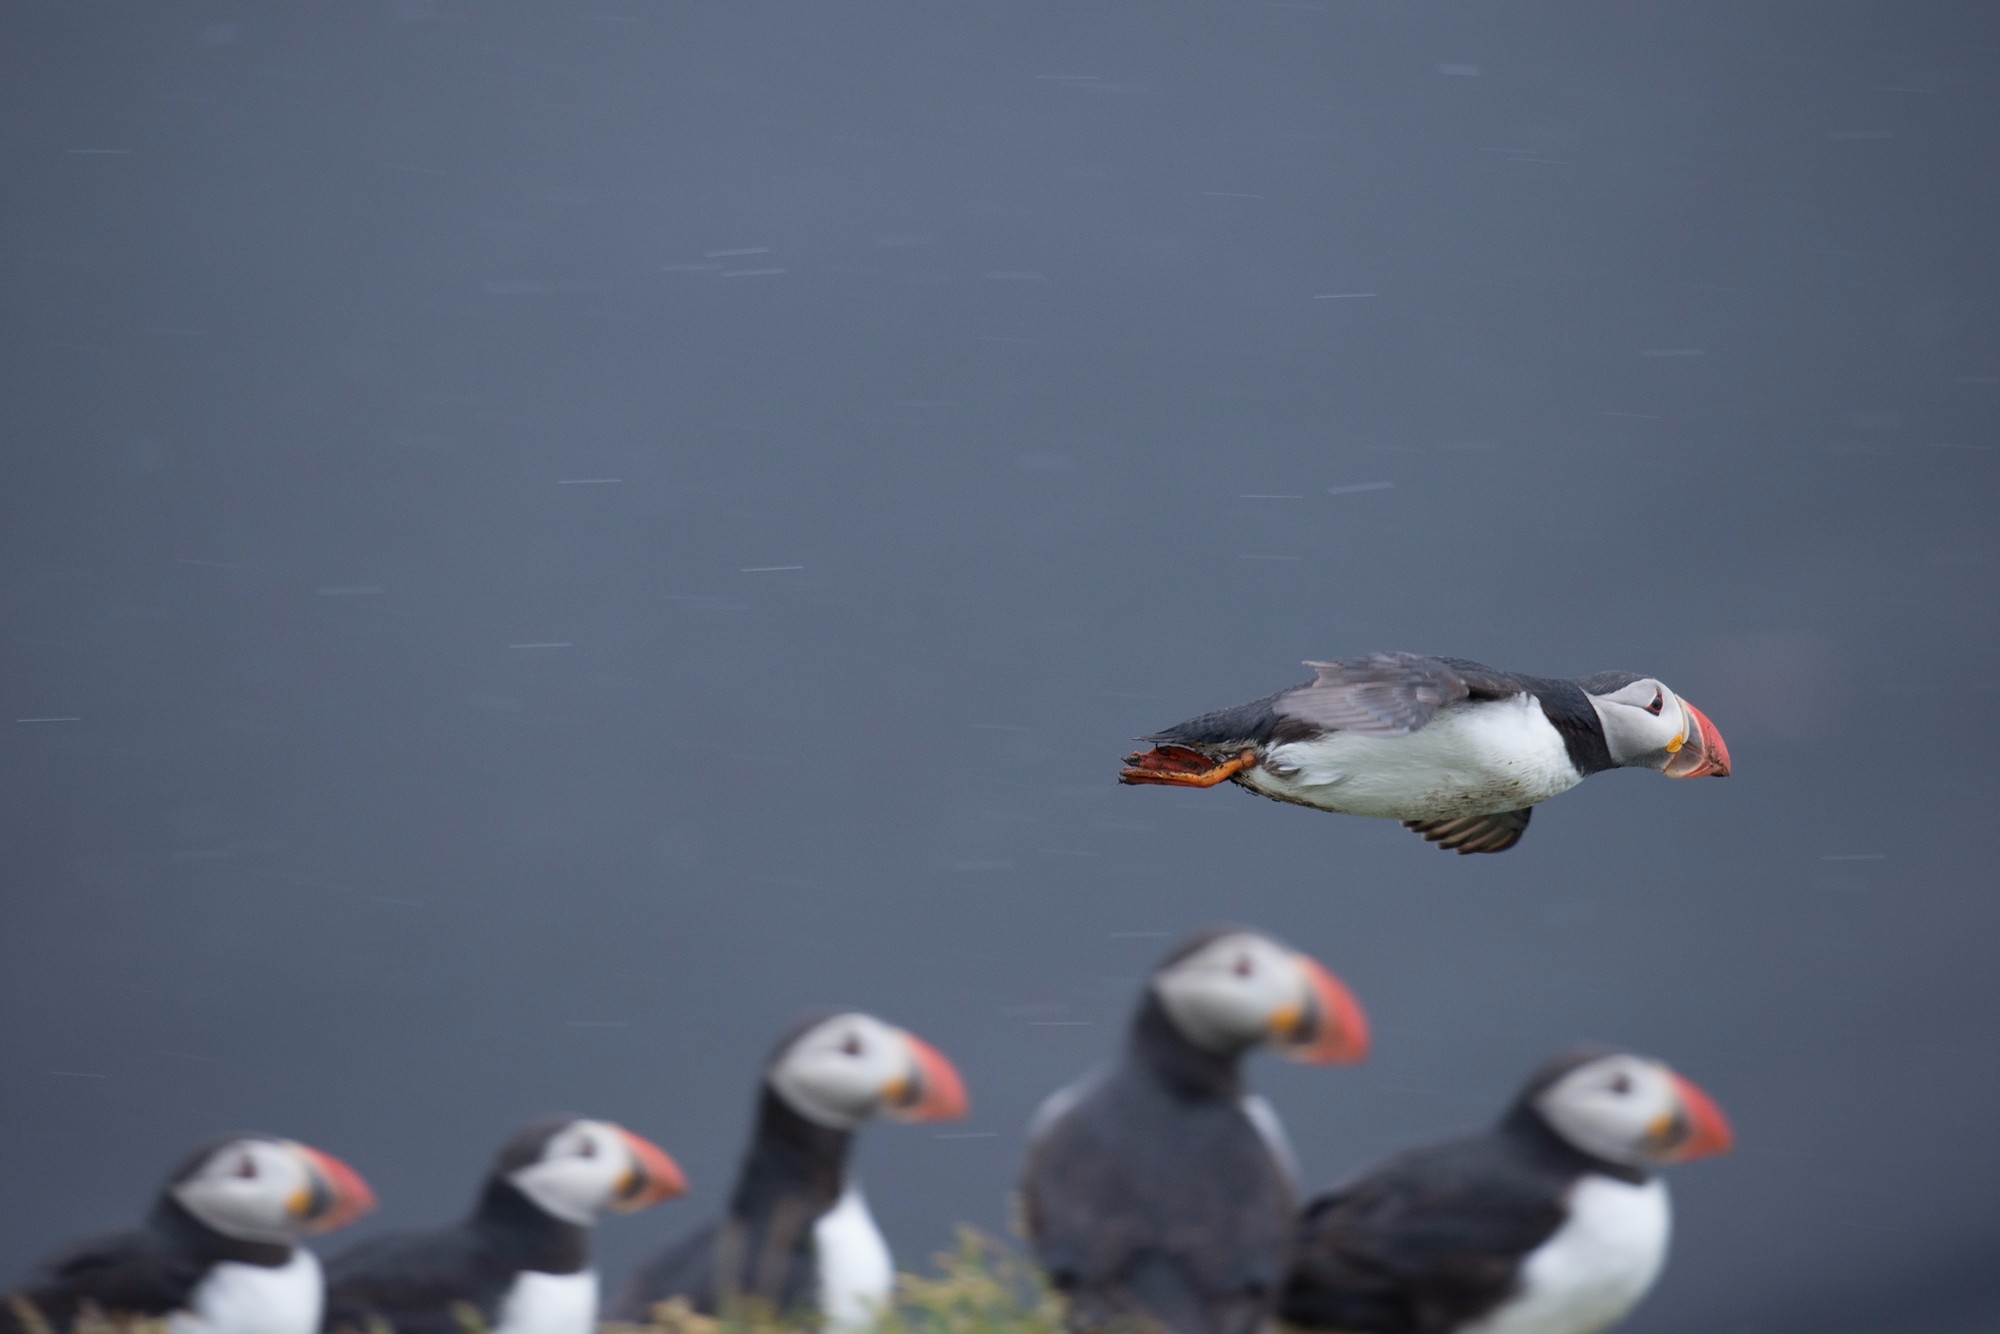 Flying puffin